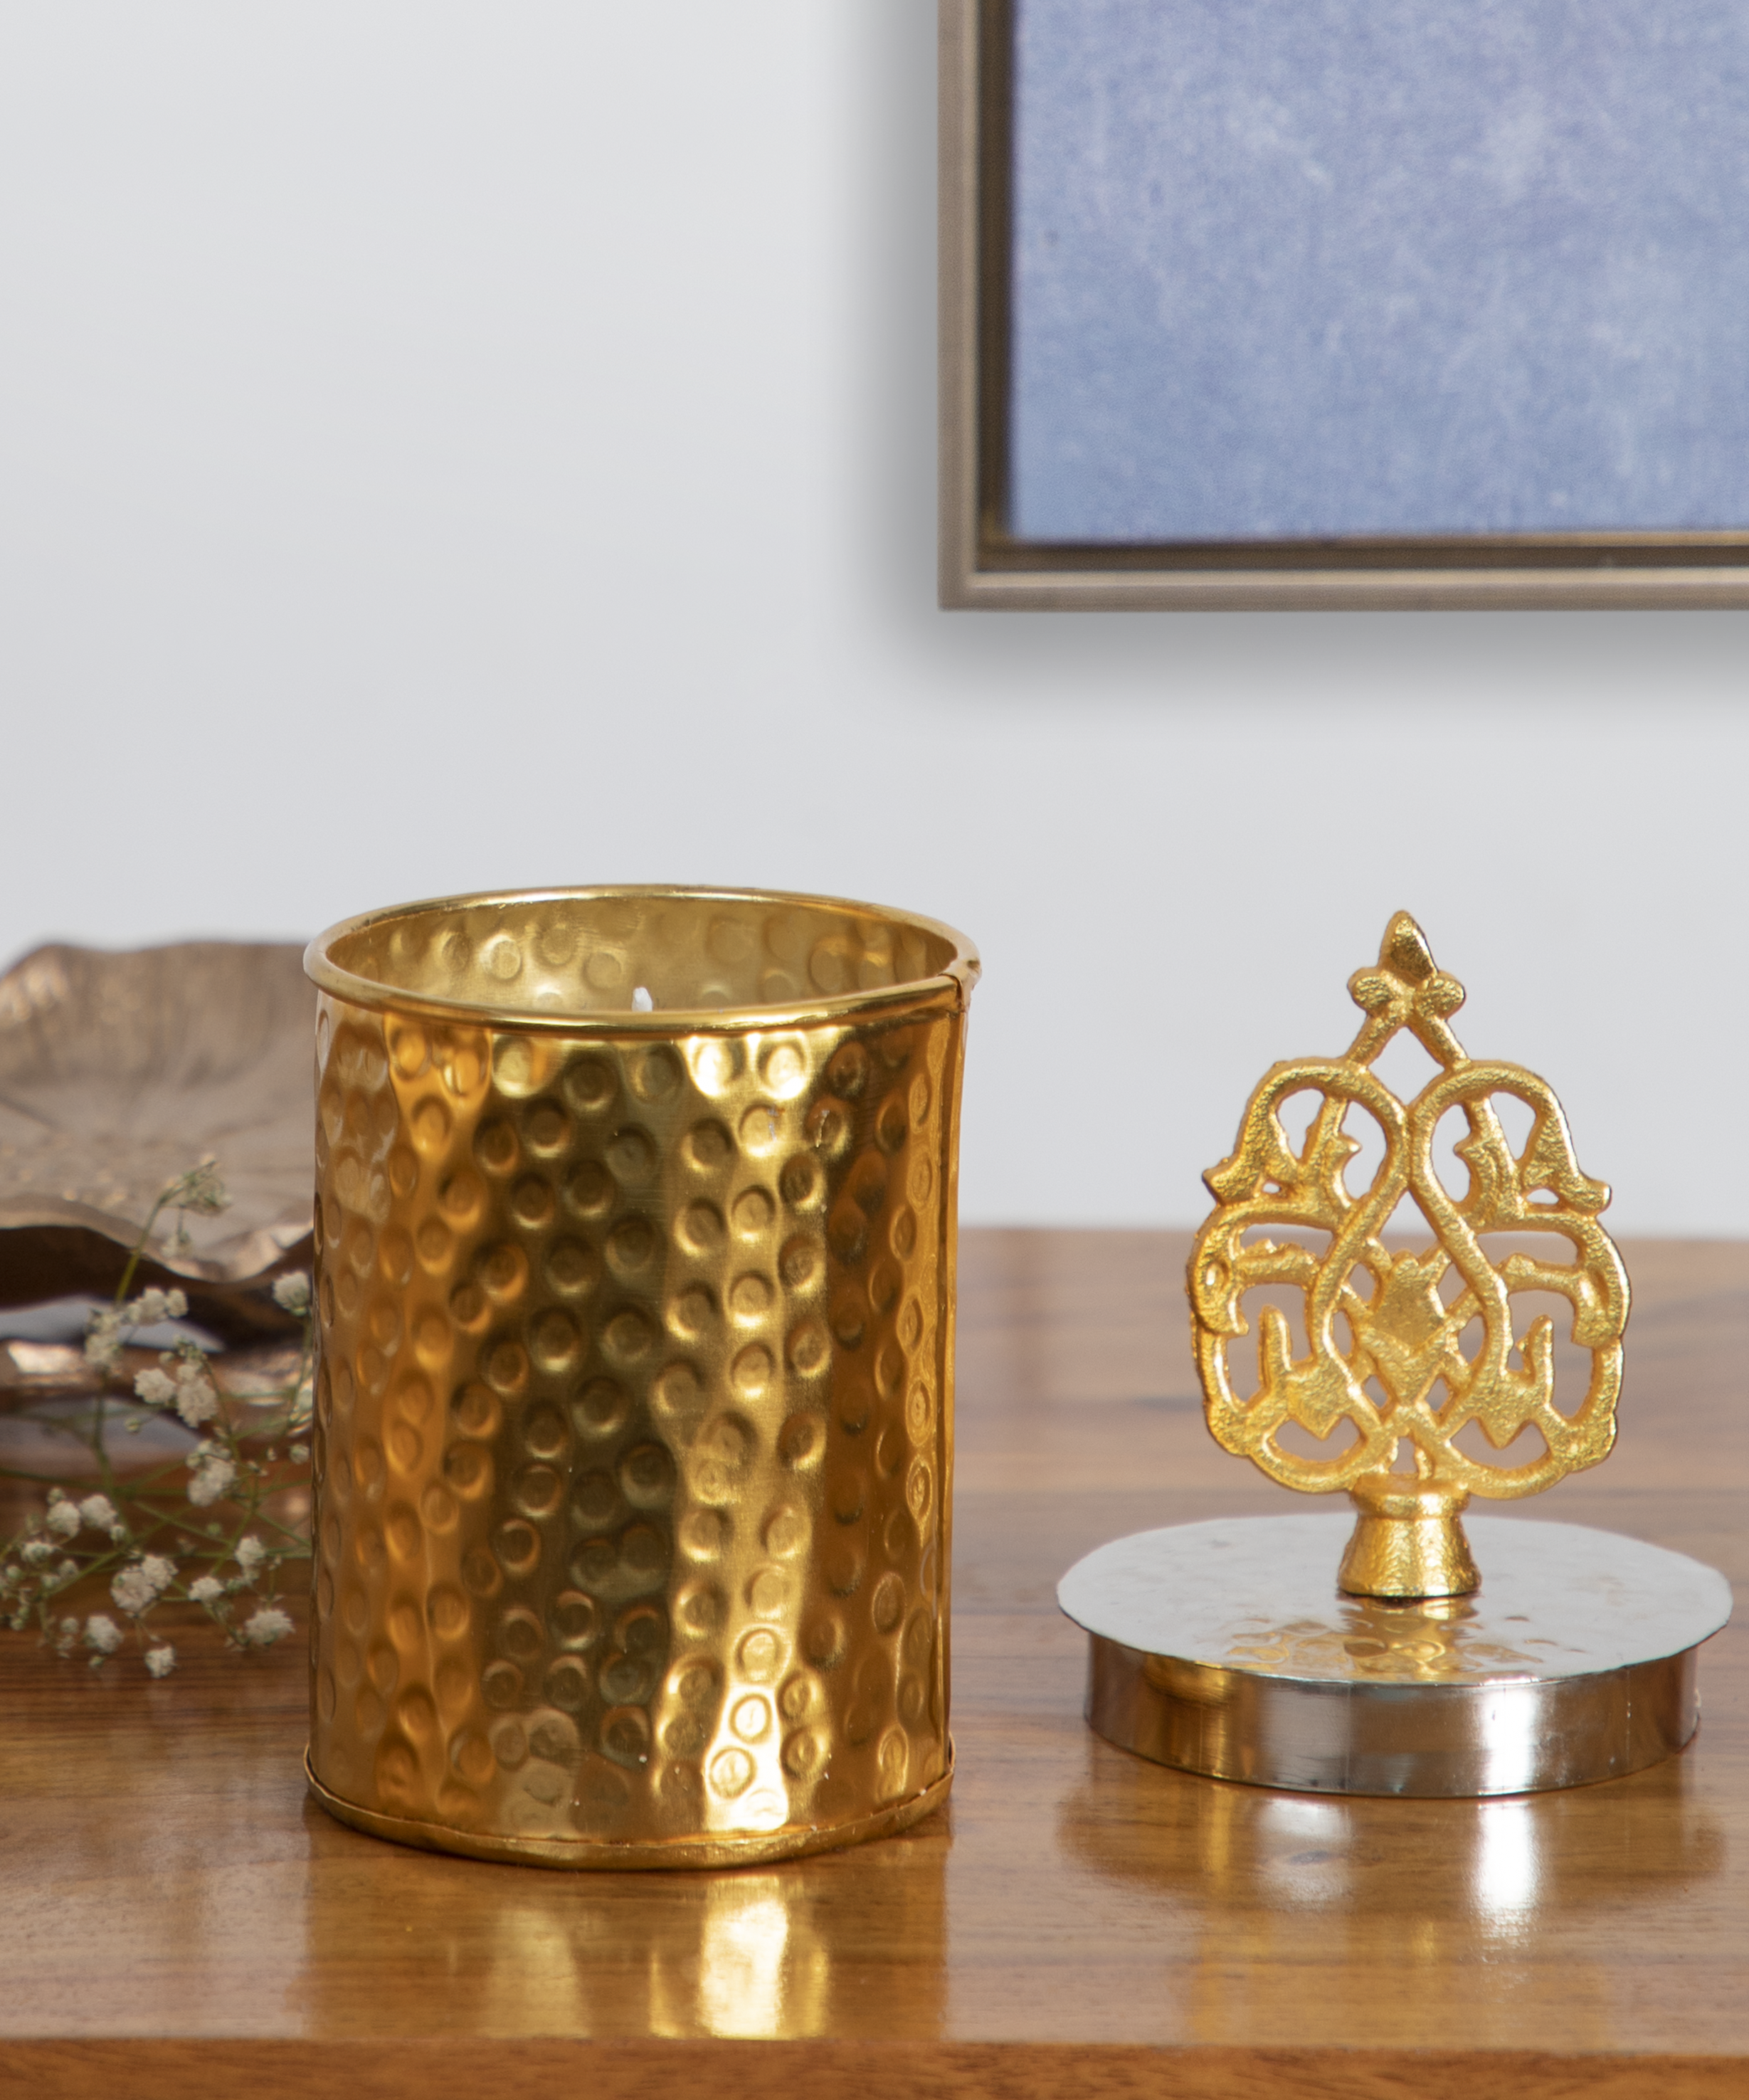 Candle Holder Jar with Crown in Gold and Silver Hammered Finish.